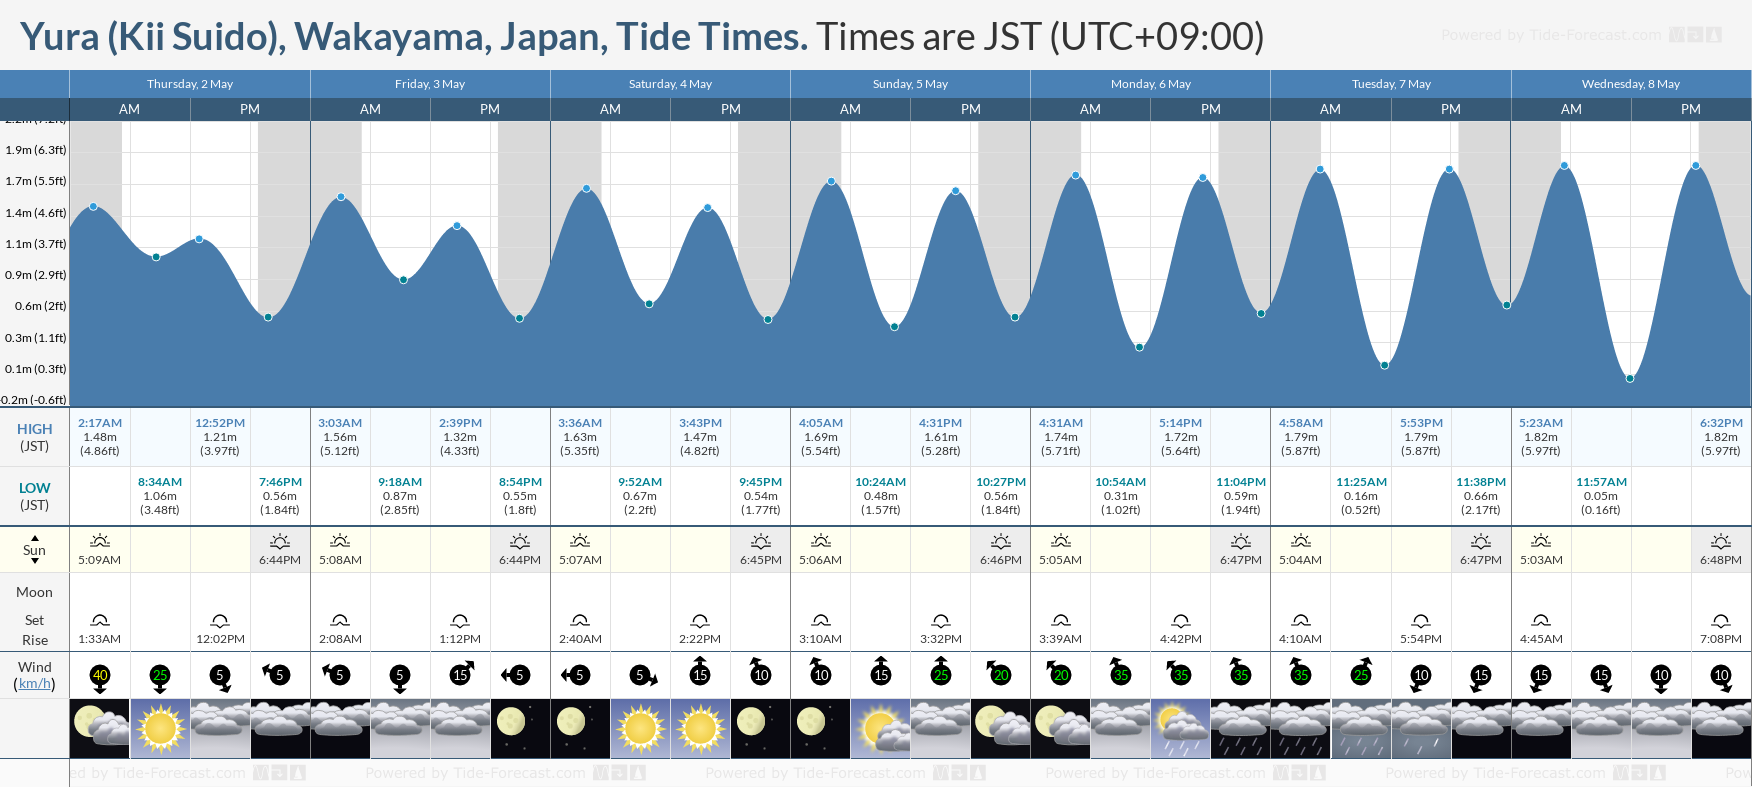 Yura (Kii Suido), Wakayama, Japan Tide Chart including high and low tide tide times for the next 7 days